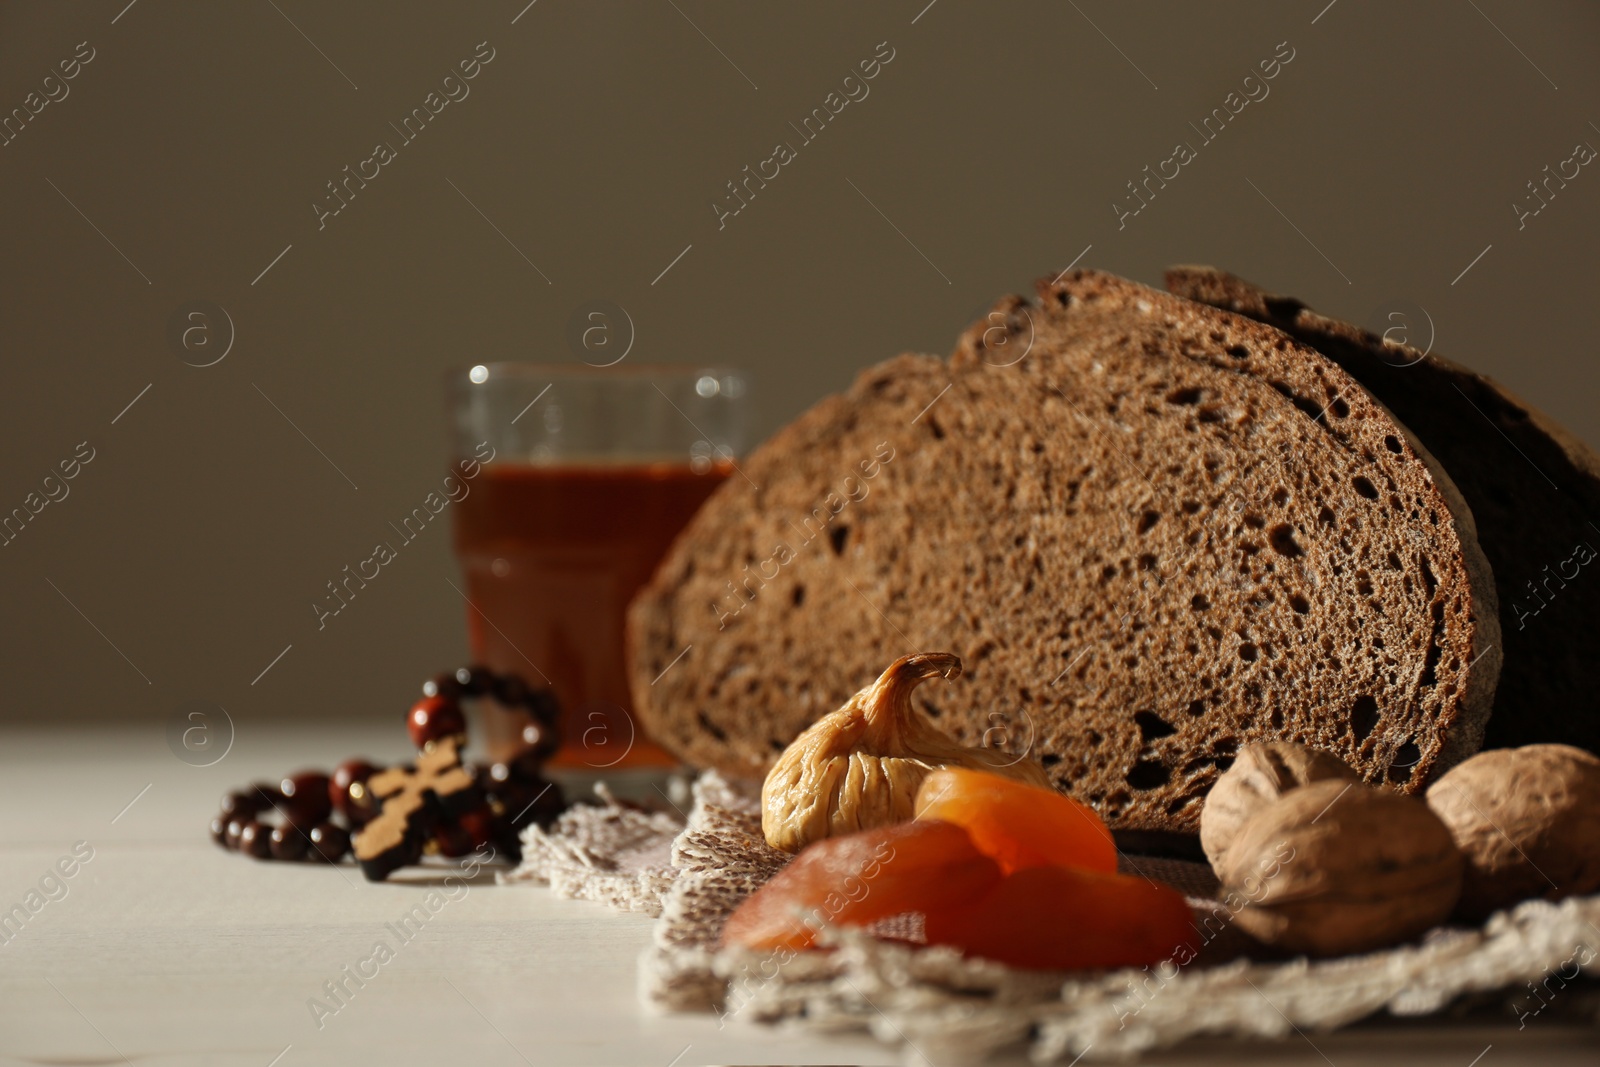 Photo of Rosary beads, dried fruits, walnuts, bread and drink on table. Lent season